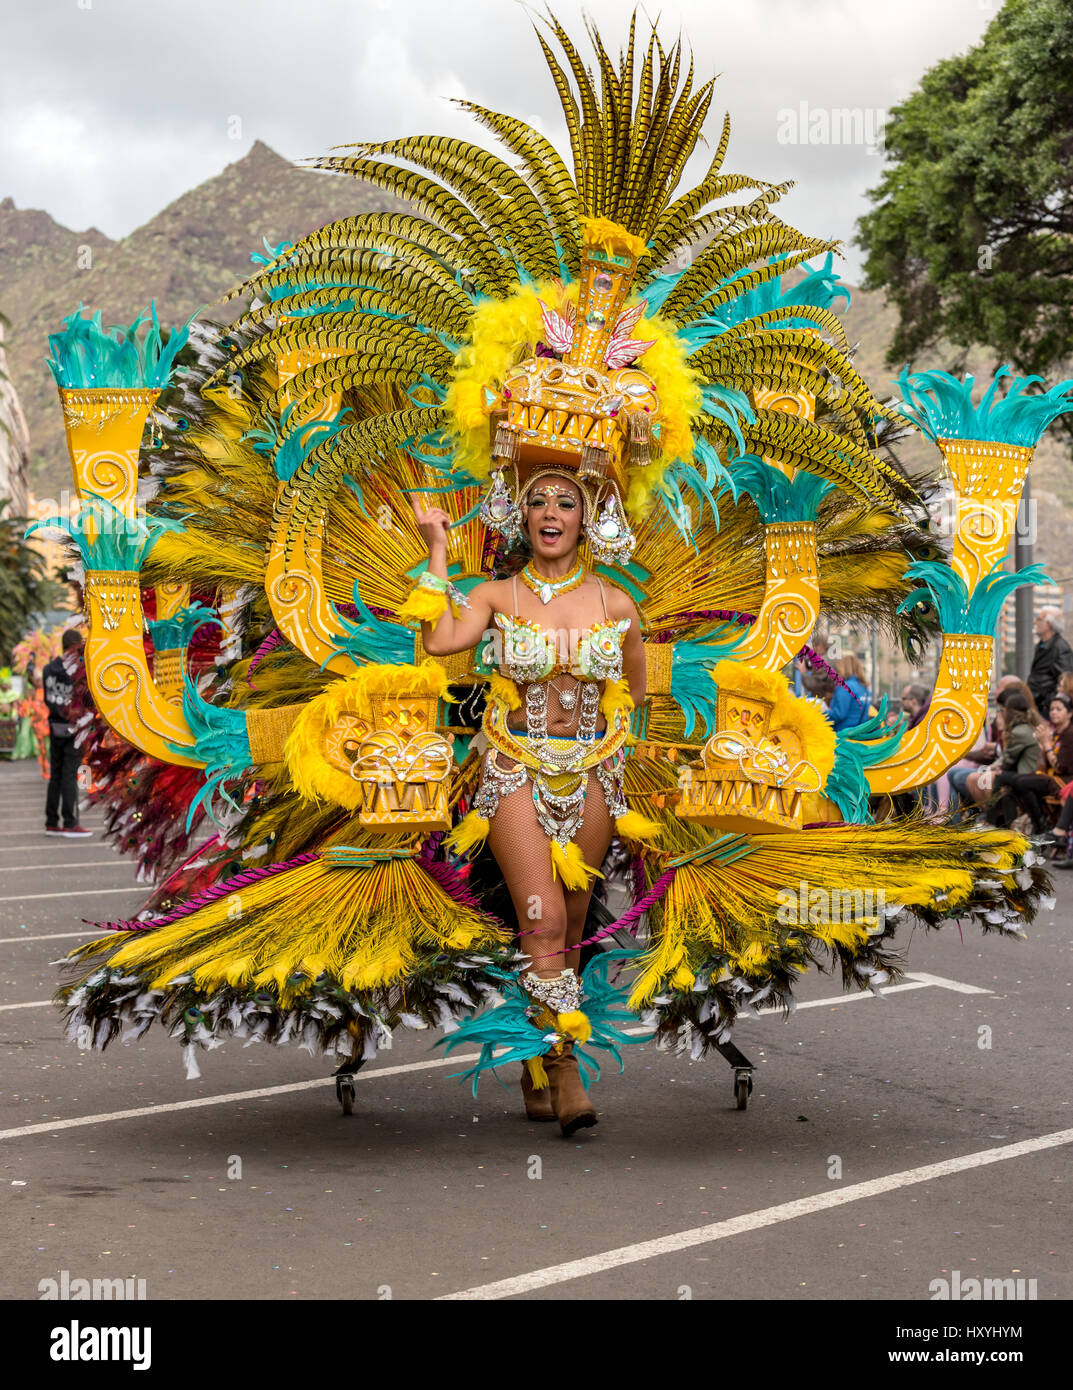 100 ideas for Carnival costumes – be different!